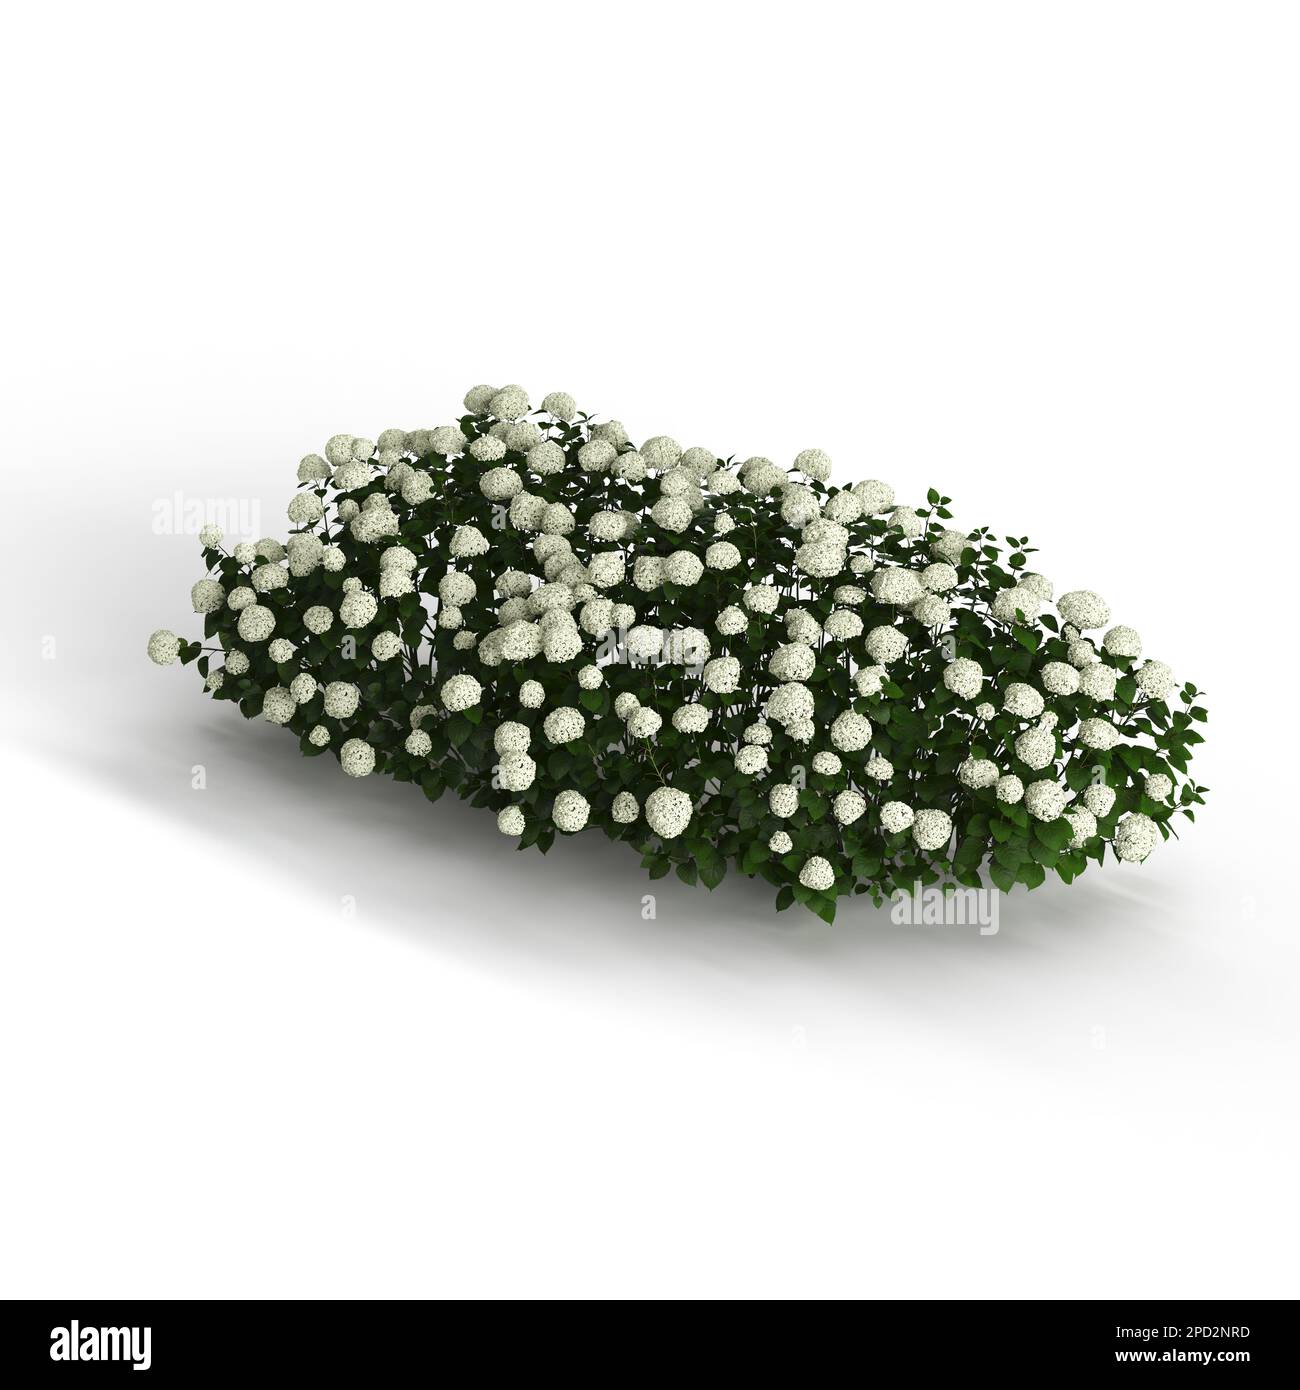 Bush of small white flowers on white surface, 3D rendering Stock Photo